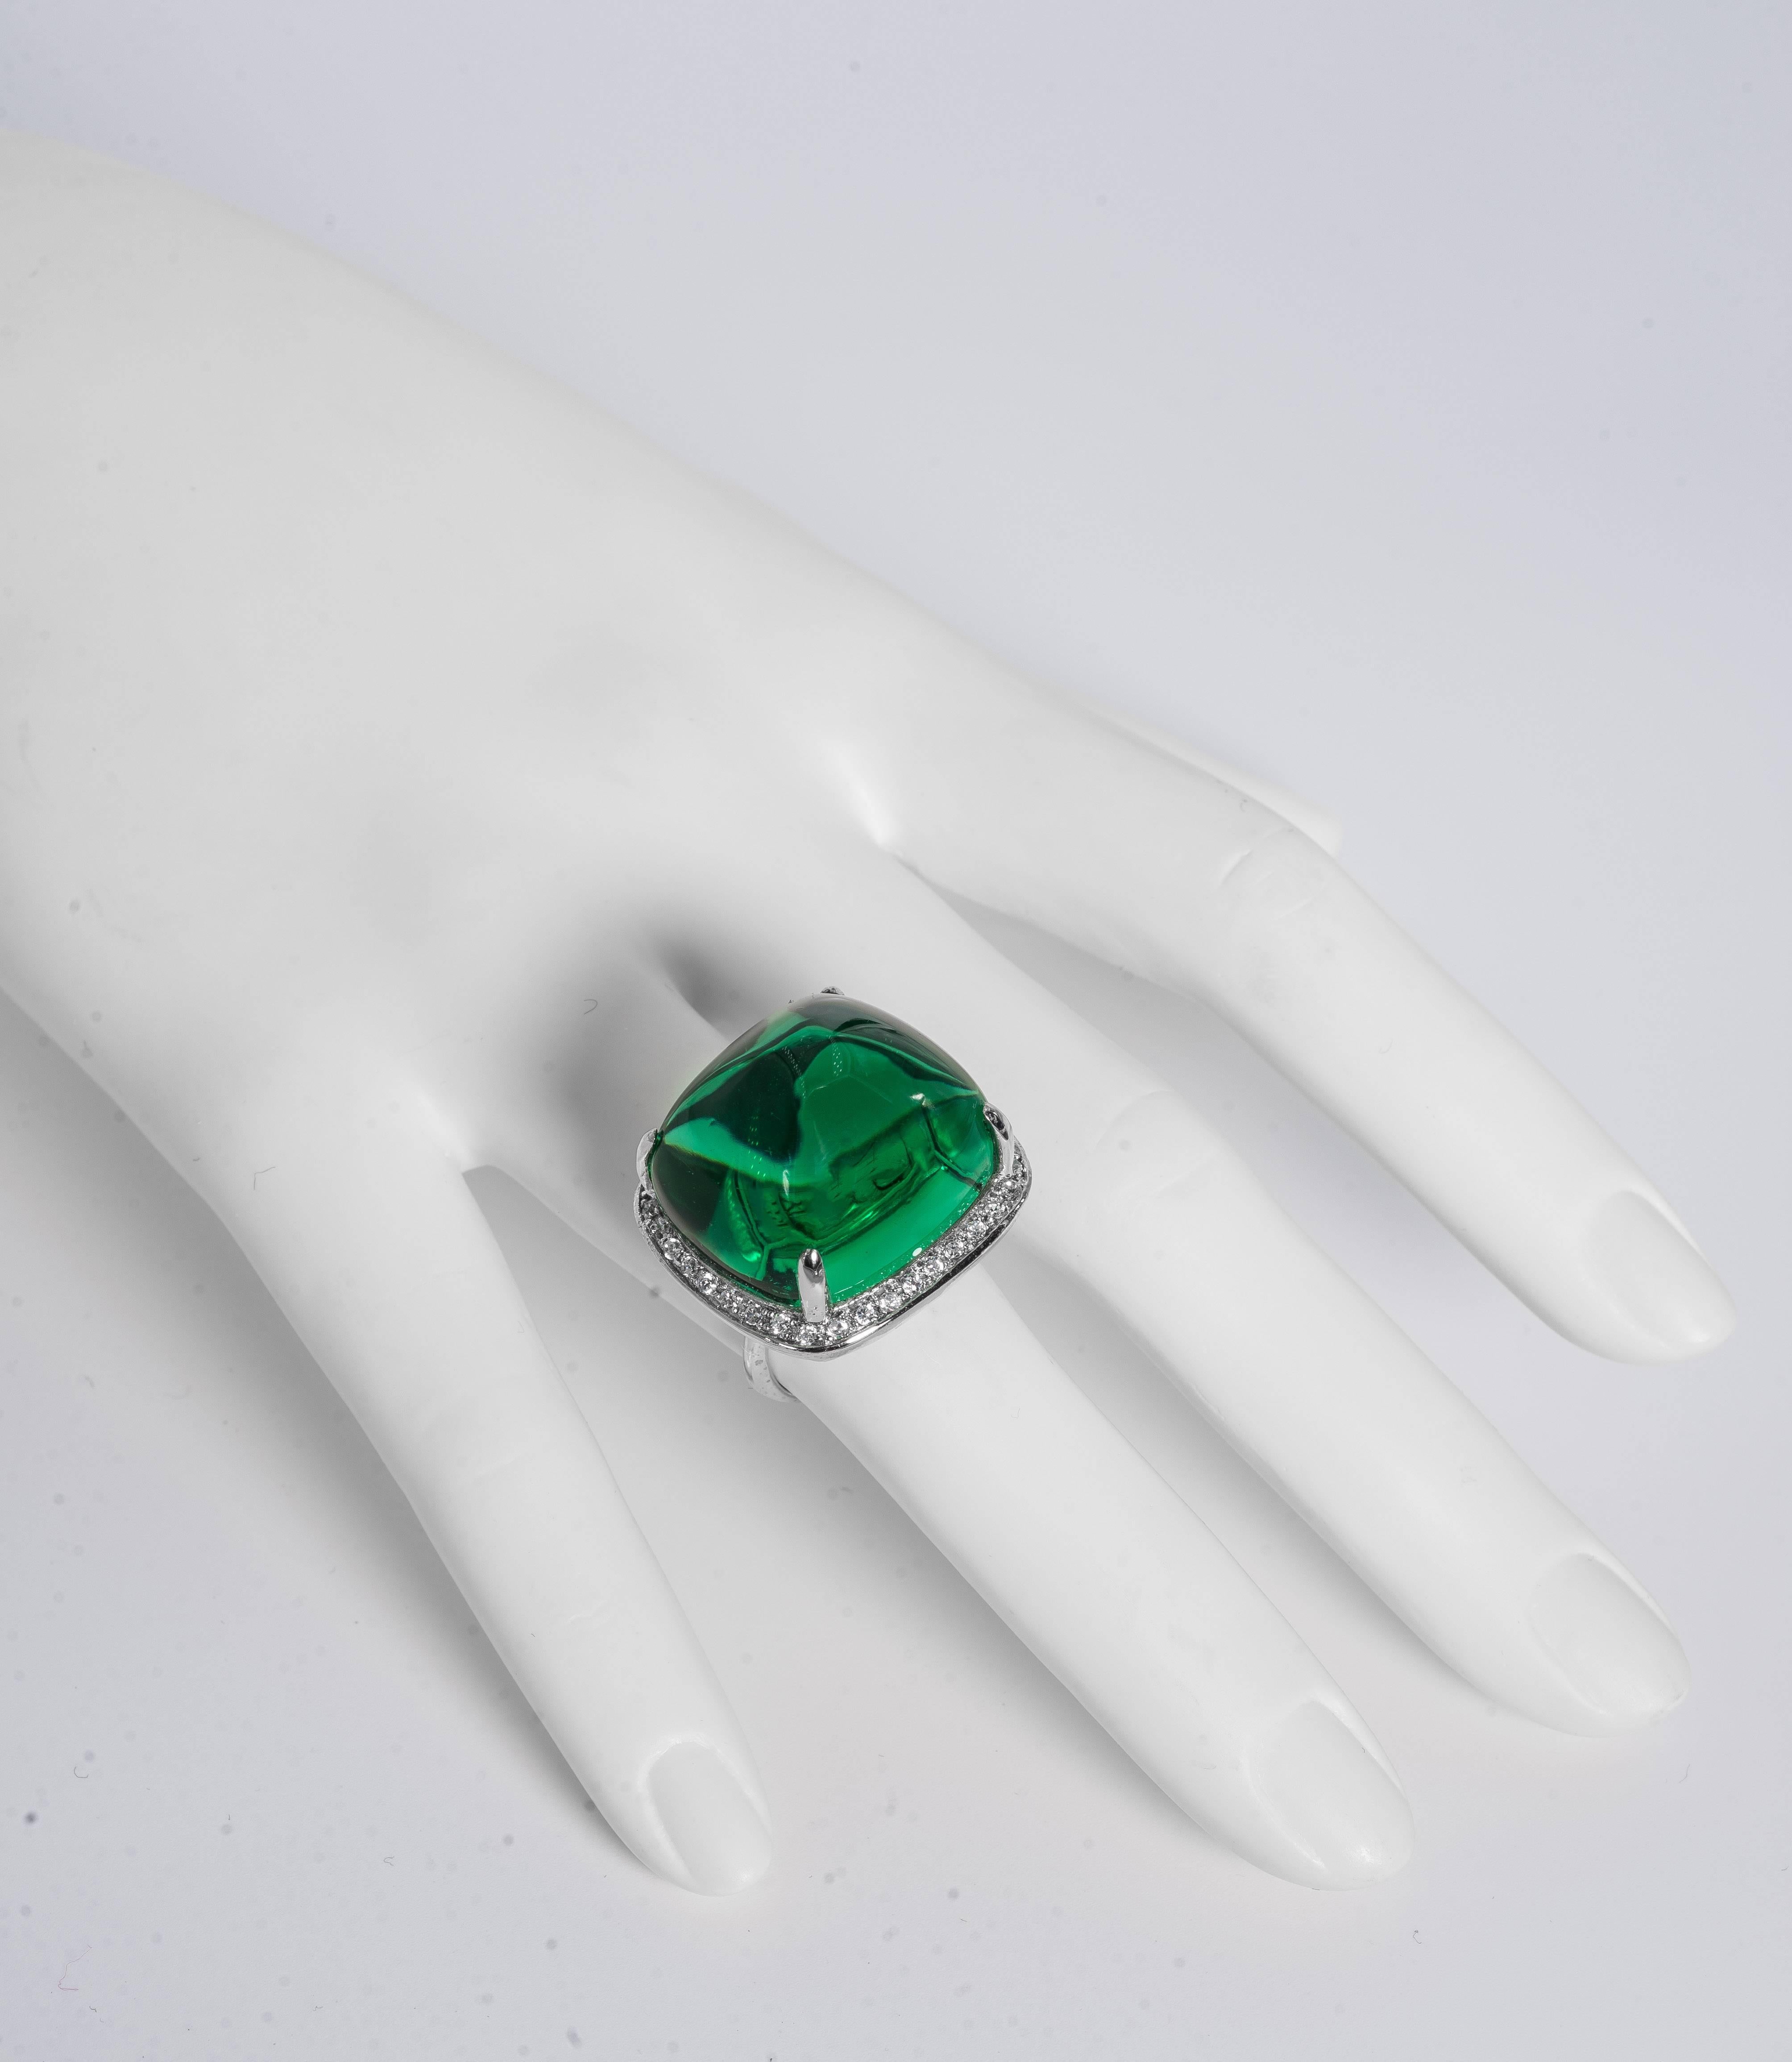 Synthetic Collection large faux 40 carat cabochon emerald diamond ring. The fabulous faux French cut pyramid cabochon has the look of 40 carats.